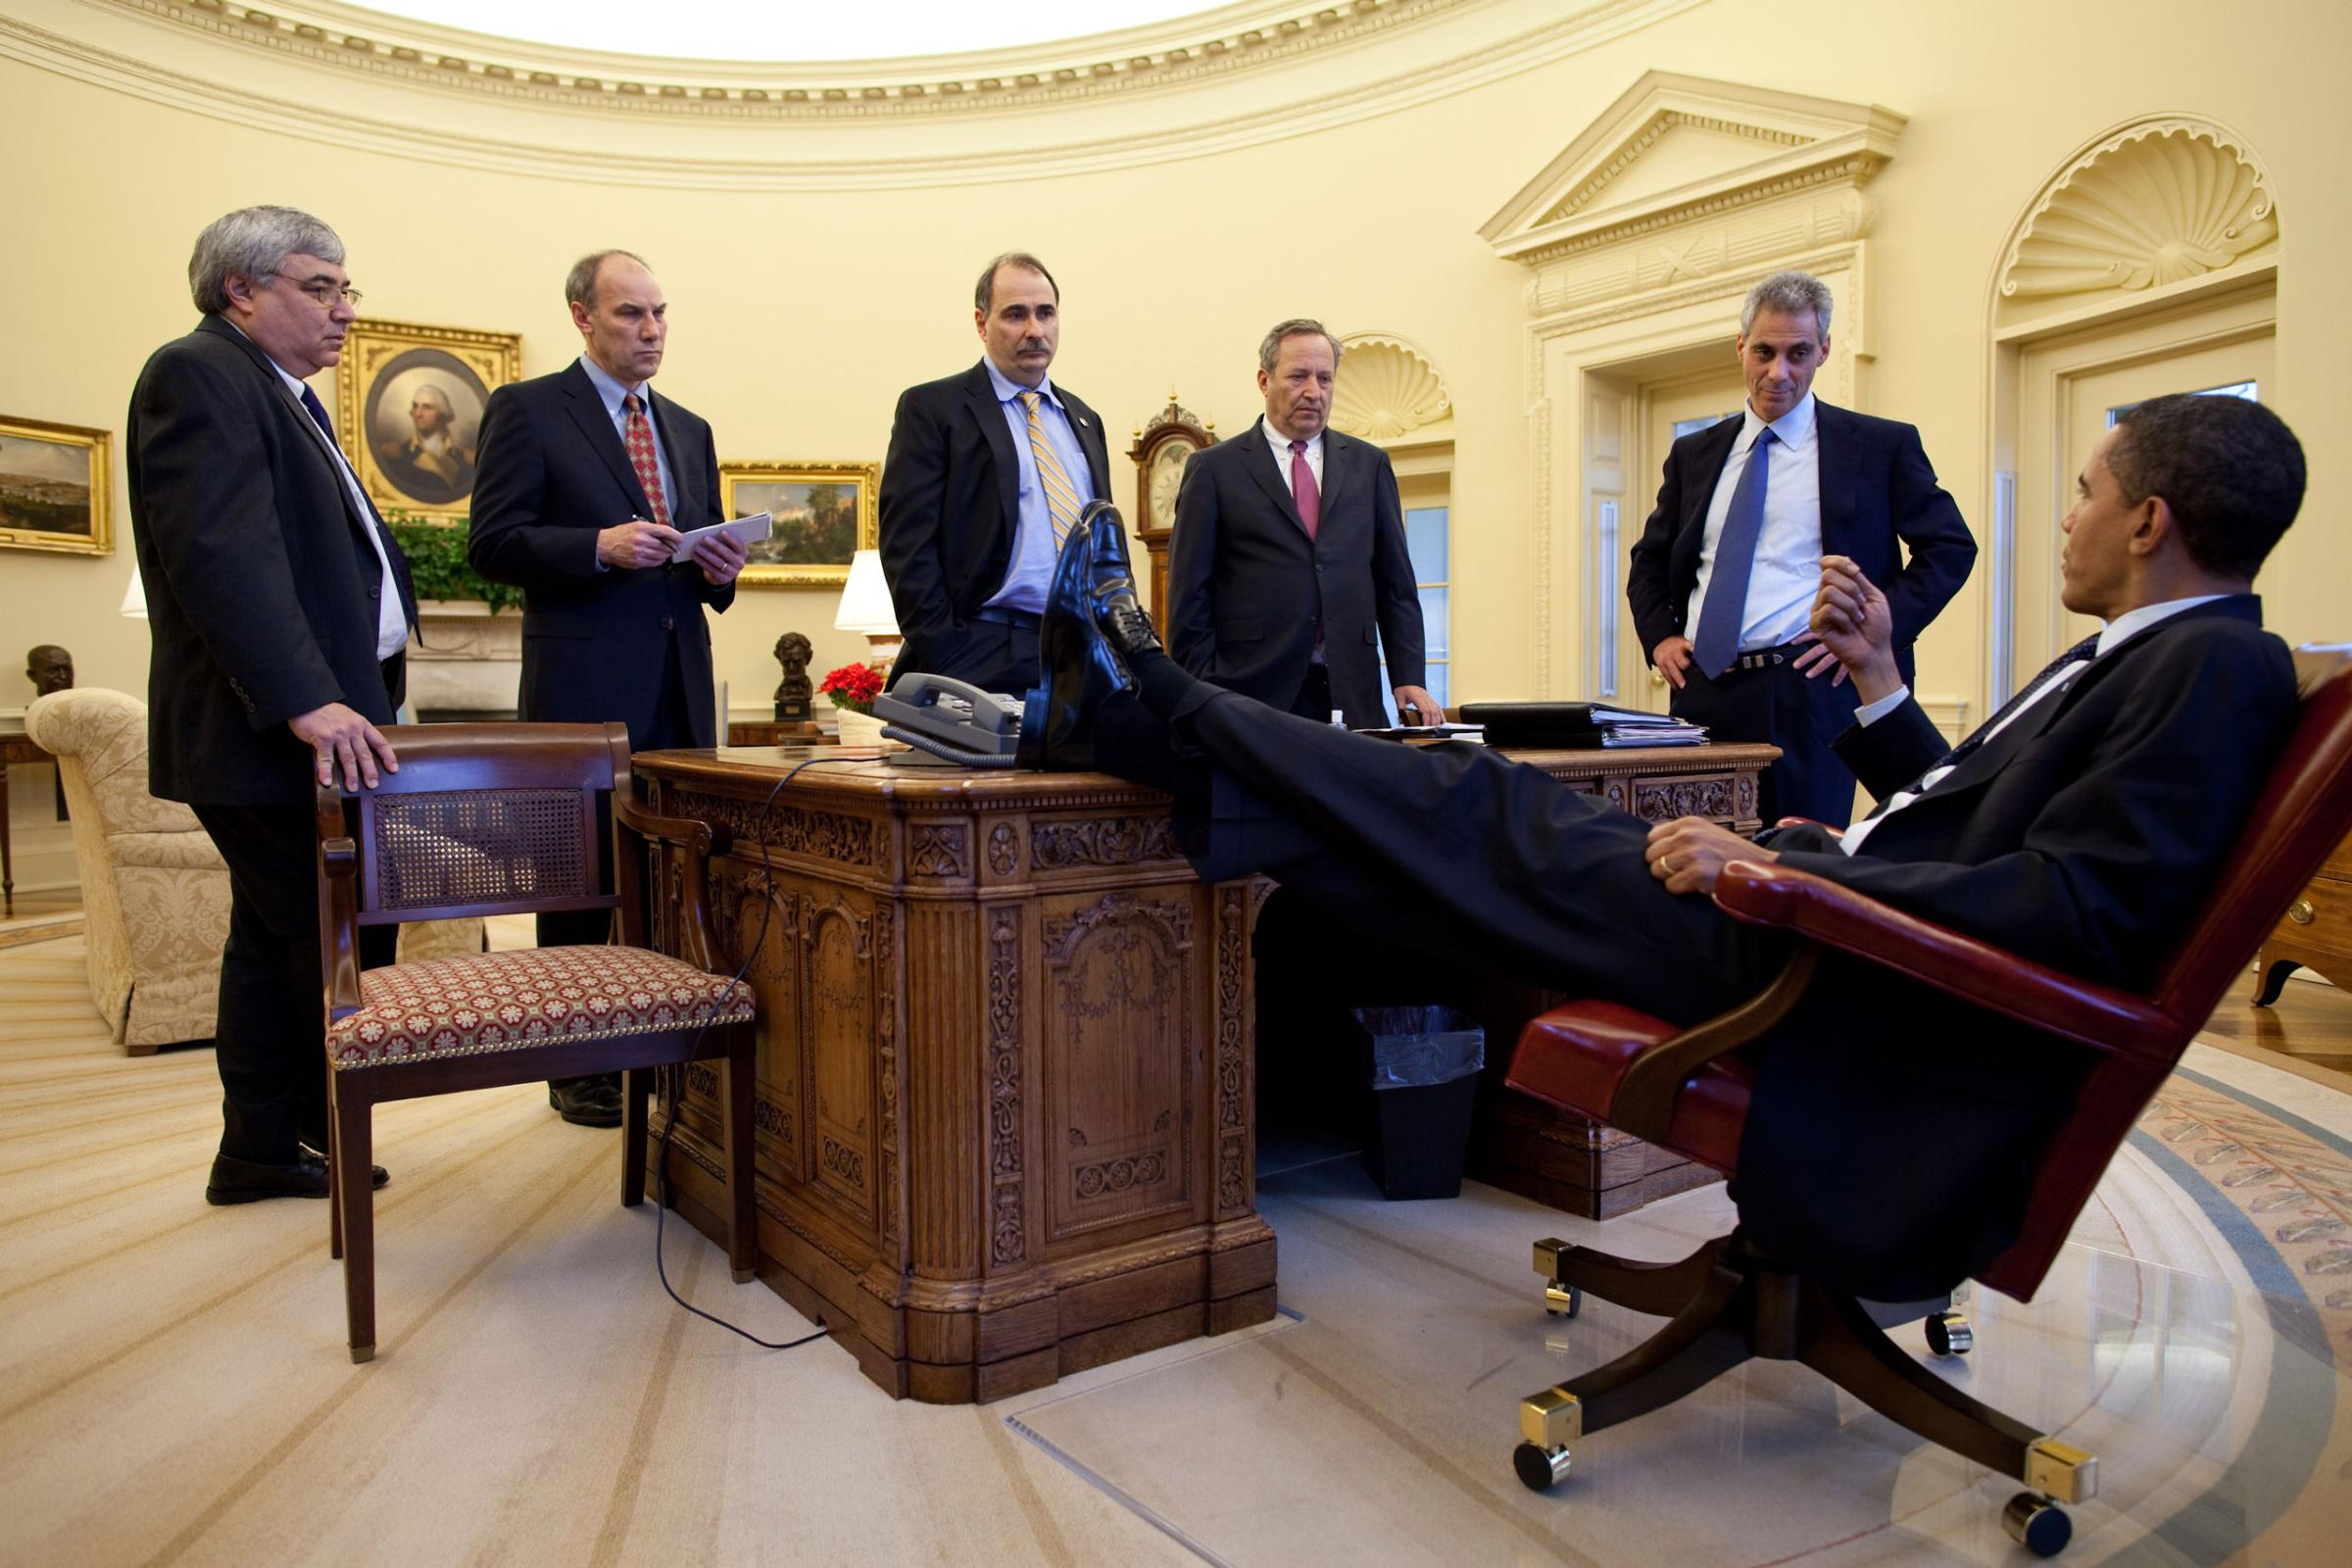 “The President talks with aides during an impromptu meeting around the Resolute desk.” Feb. 4, 2009